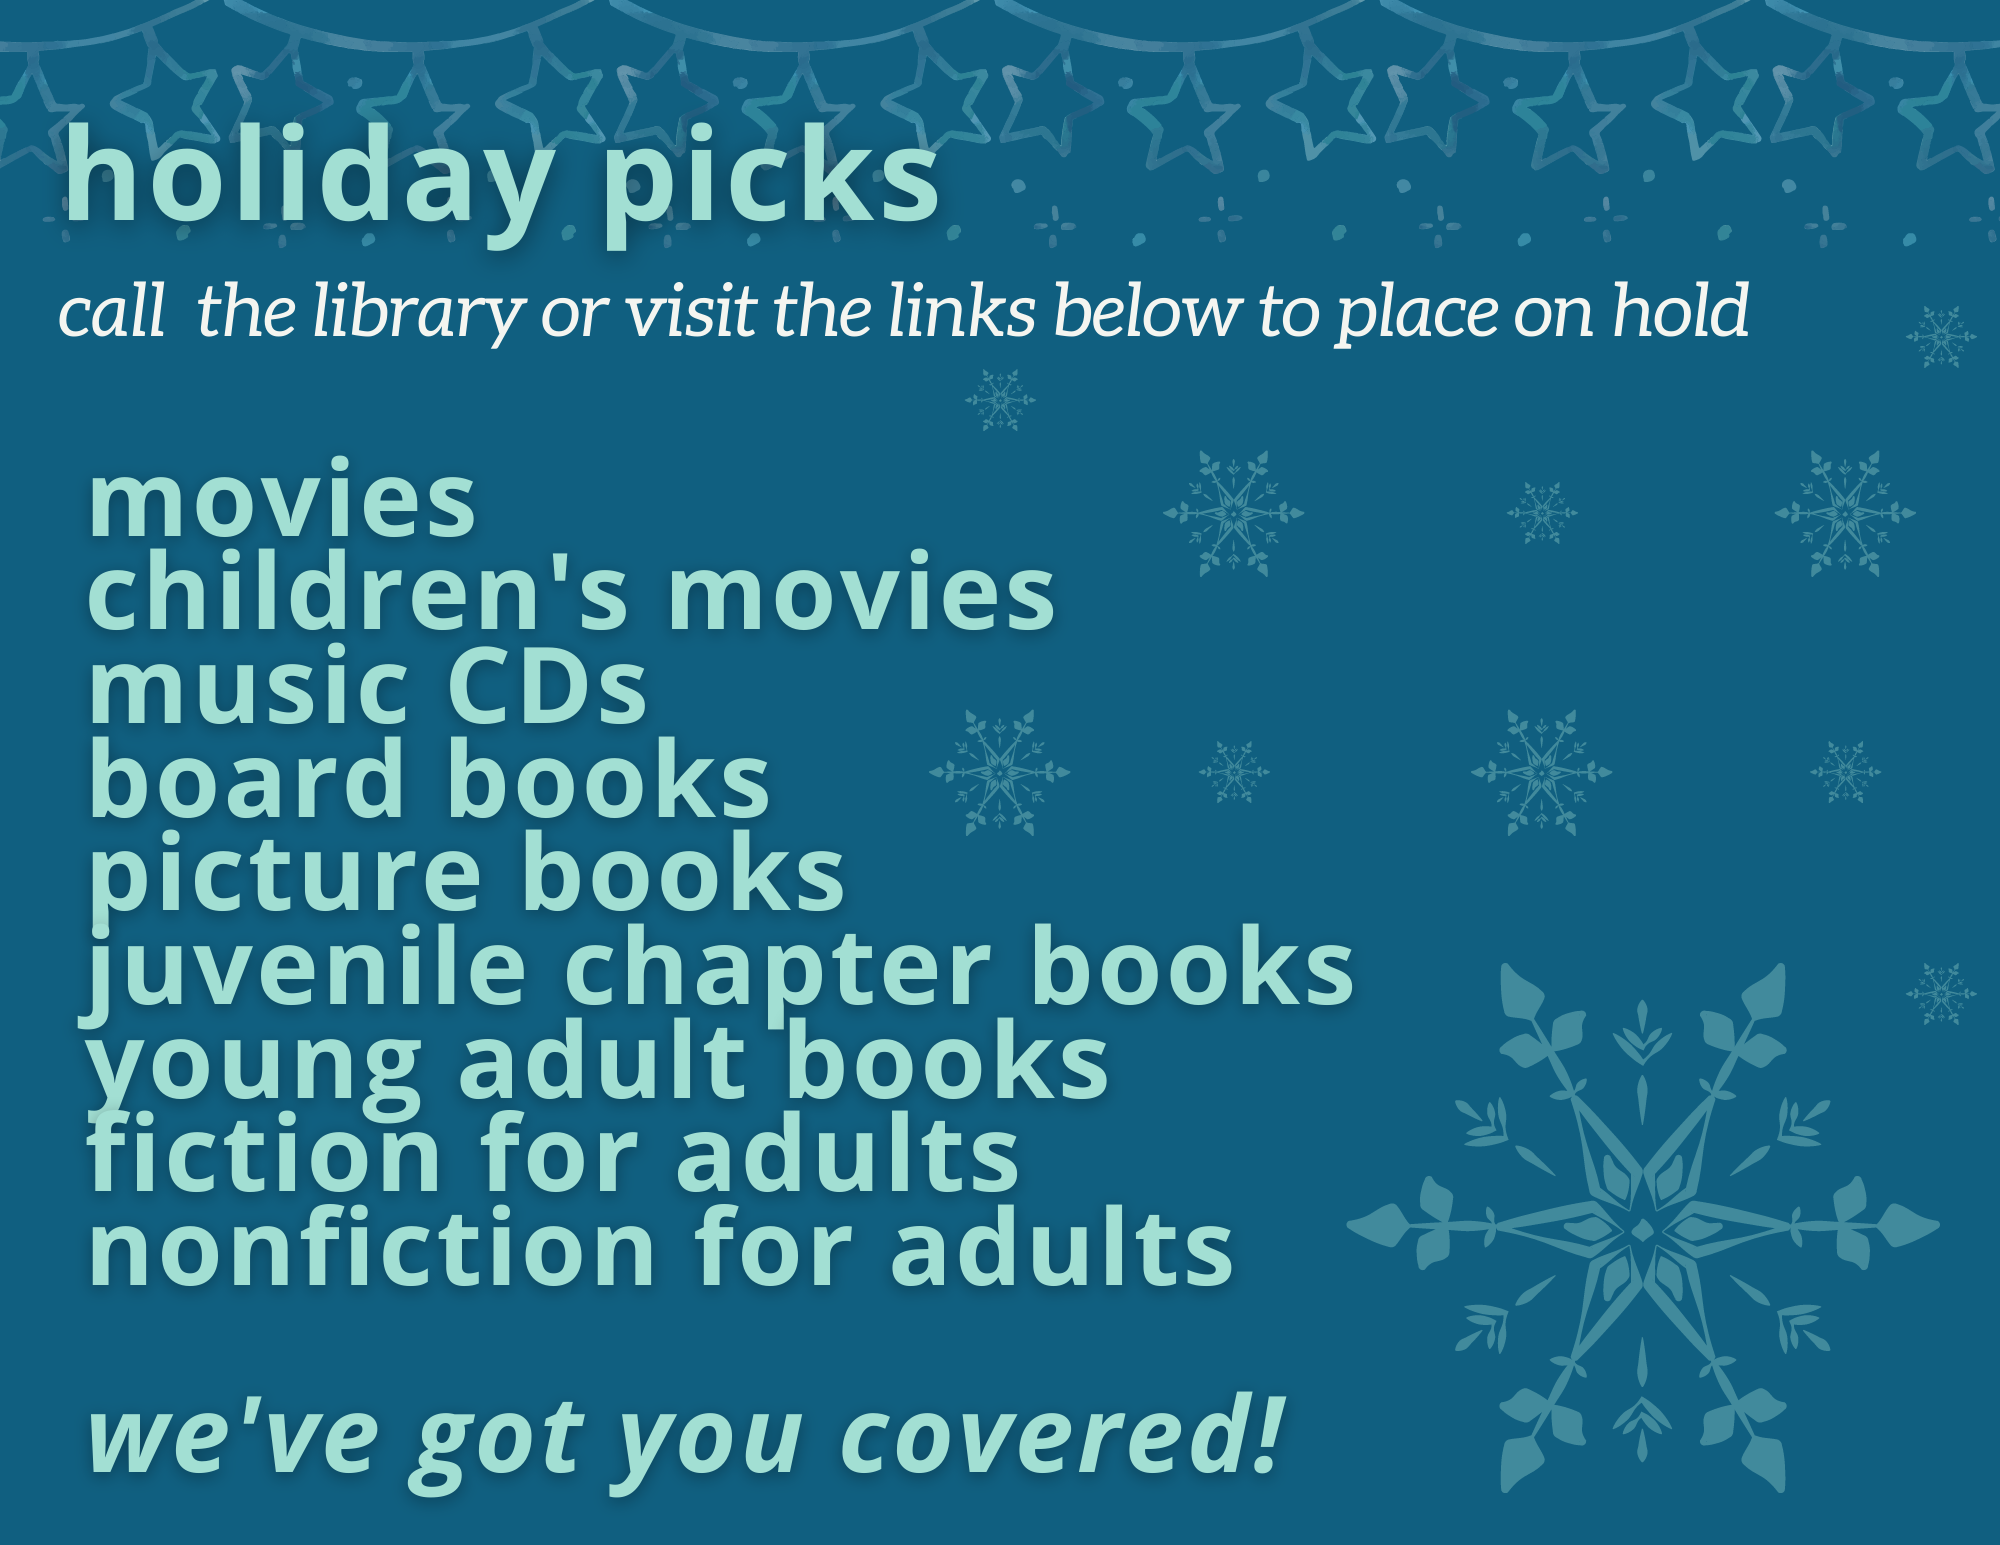 Holiday Picks. Call the library or visit the links below to place on hold. Movies, children's movies, music CDs, board books, picture books, juvenile chapter books, young adult books, fiction for adults, nonfiction for adults, we've got you covered!